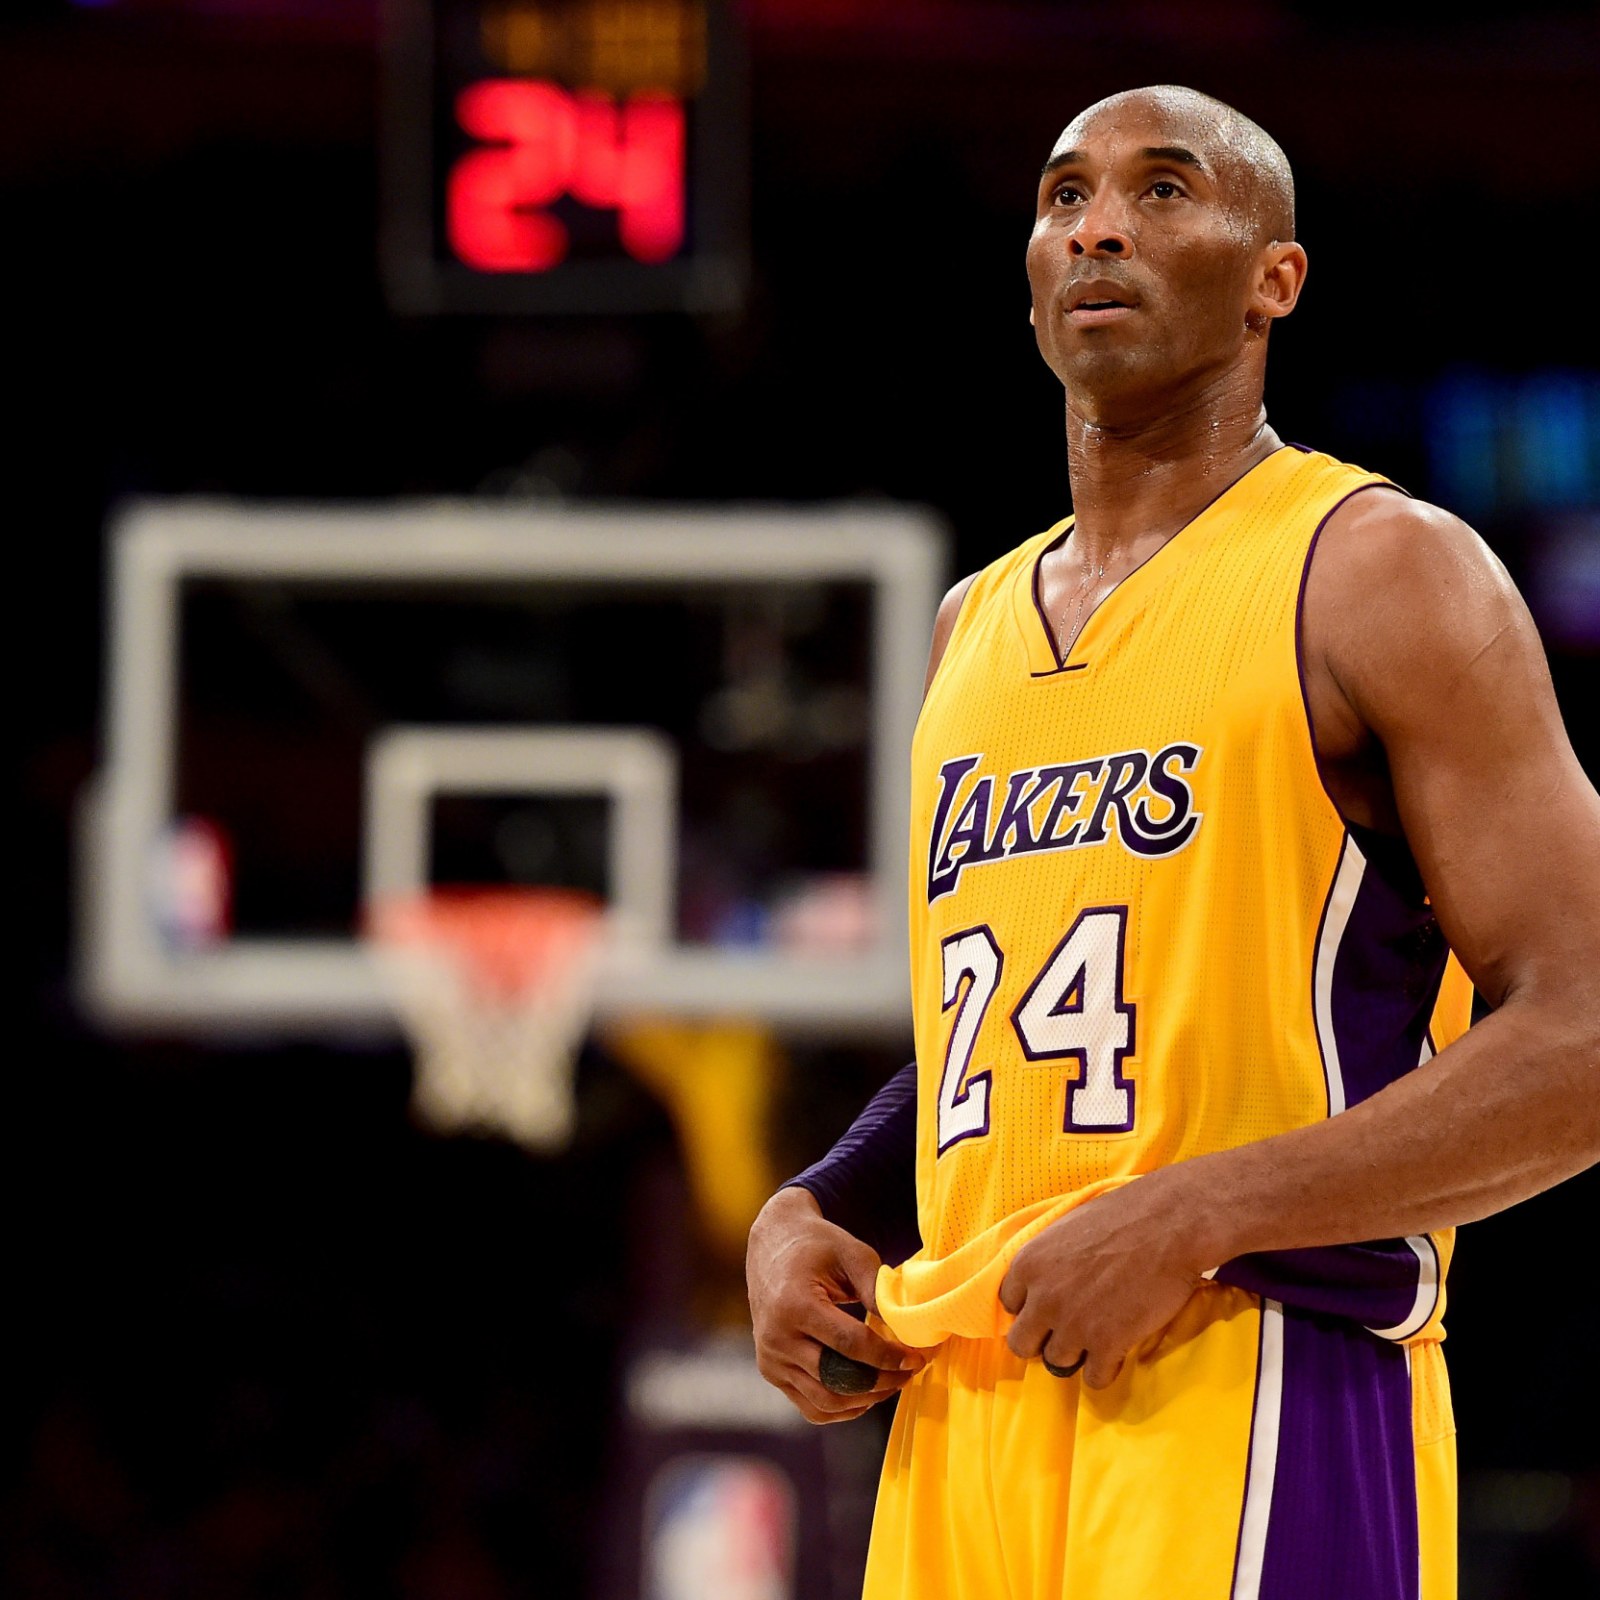 Verslaggever Afsnijden Hoelahoep Kobe Bryant's Death Sparks Petition to Get Lakers Star on NBA Logo: 'Make  His Memory Last Forever'